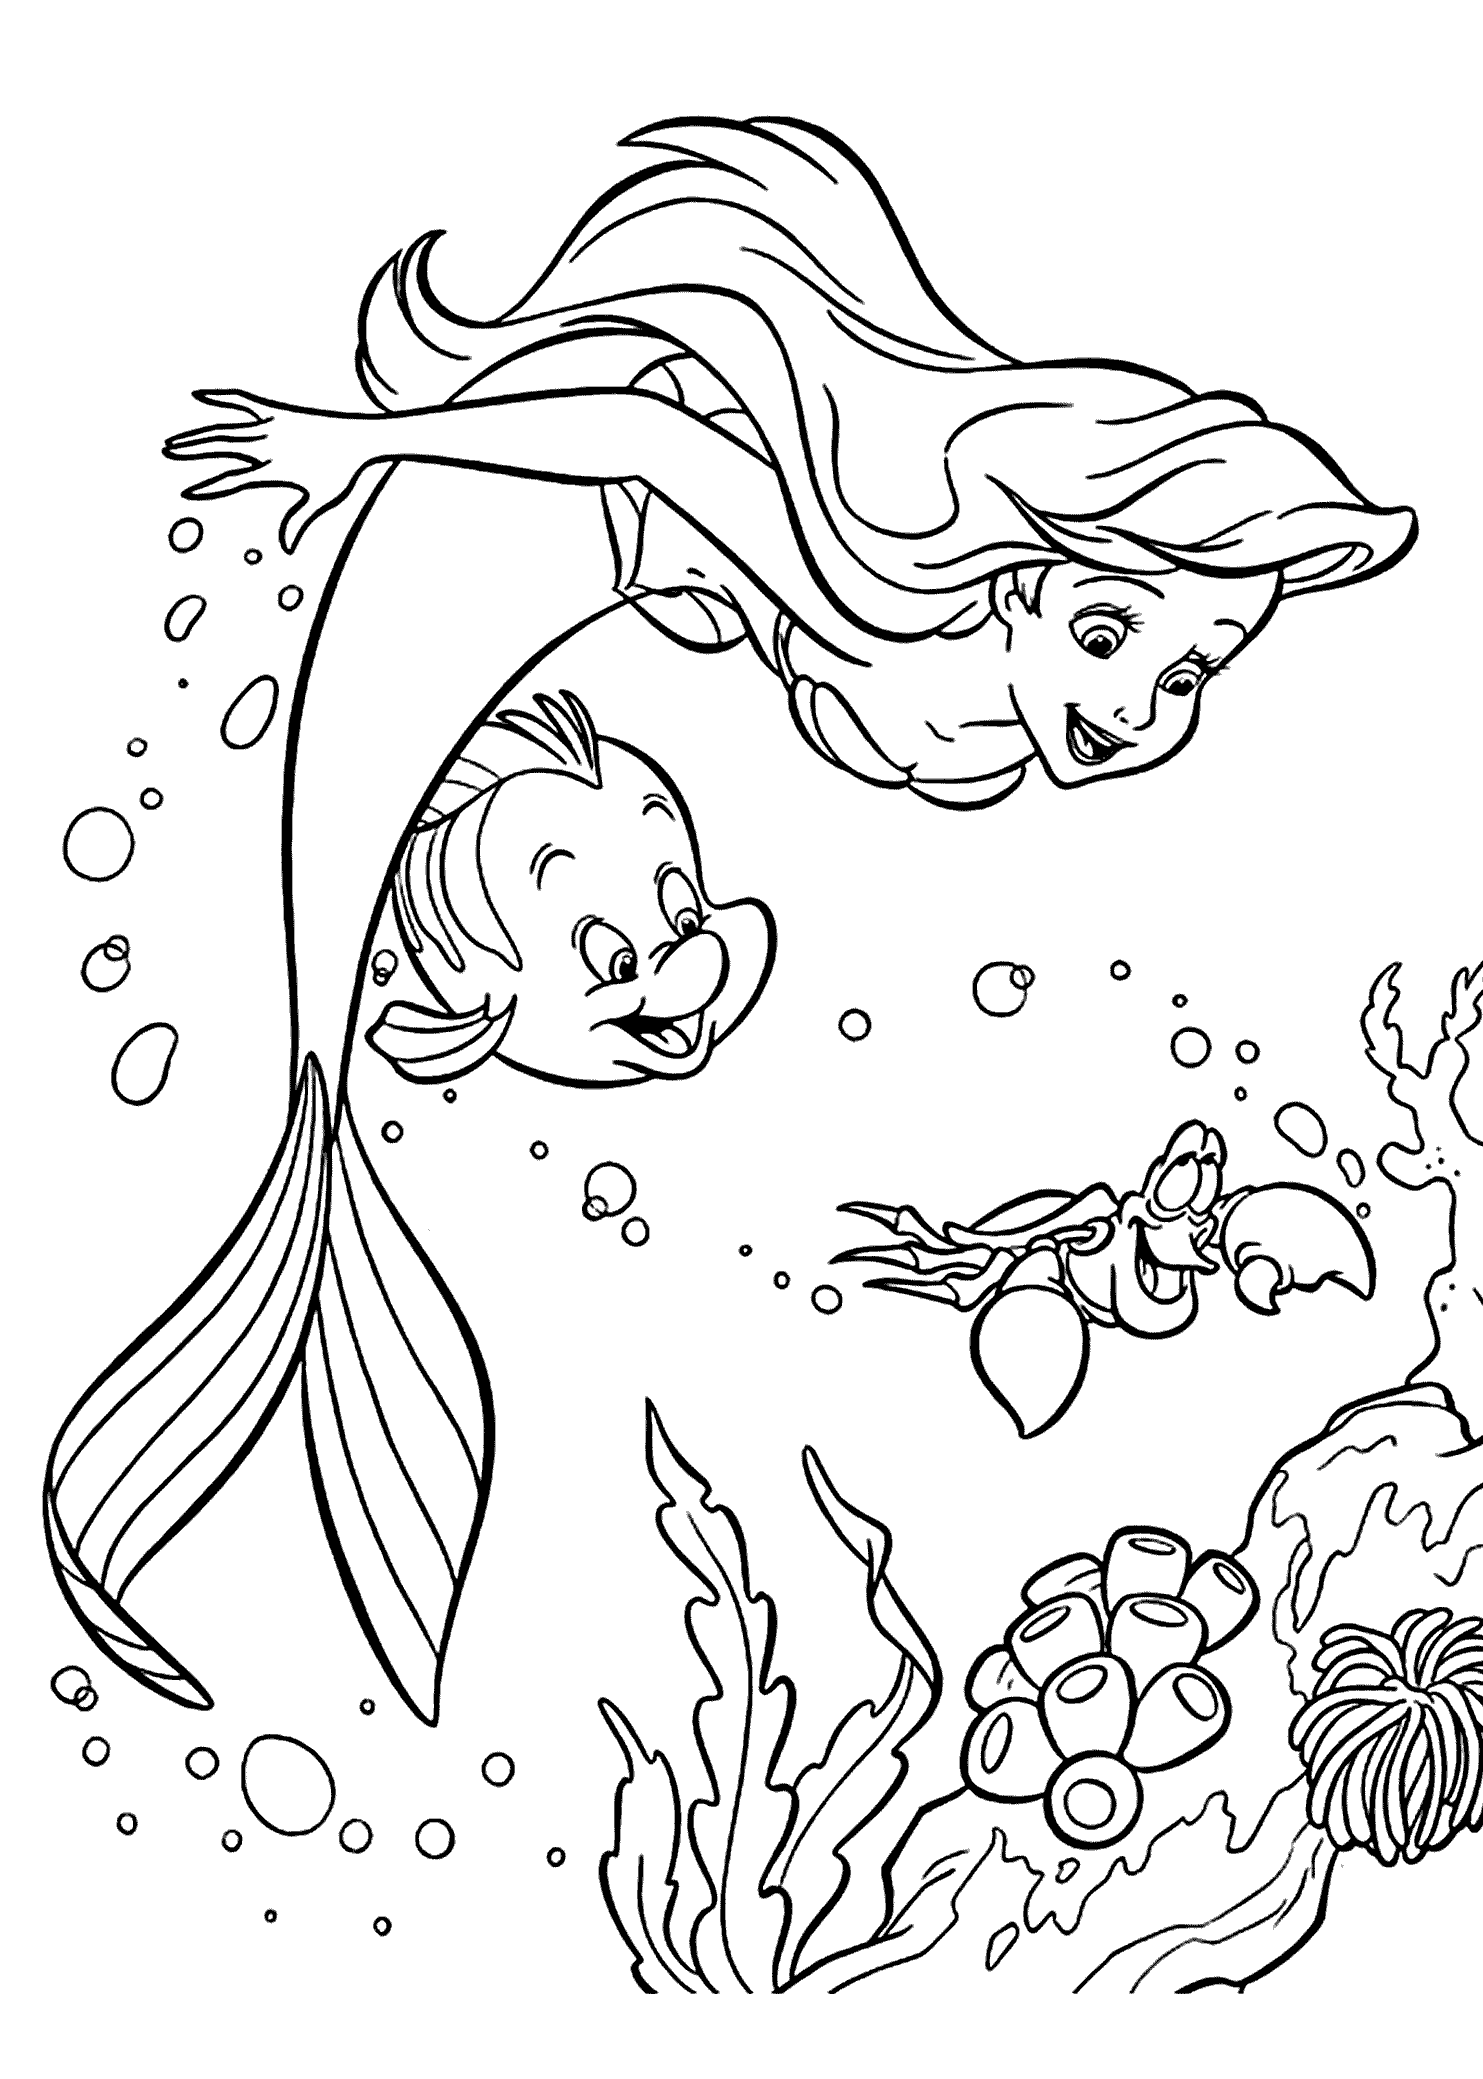 coloring page ariel the little mermaid coloring pages to download and print page ariel coloring 